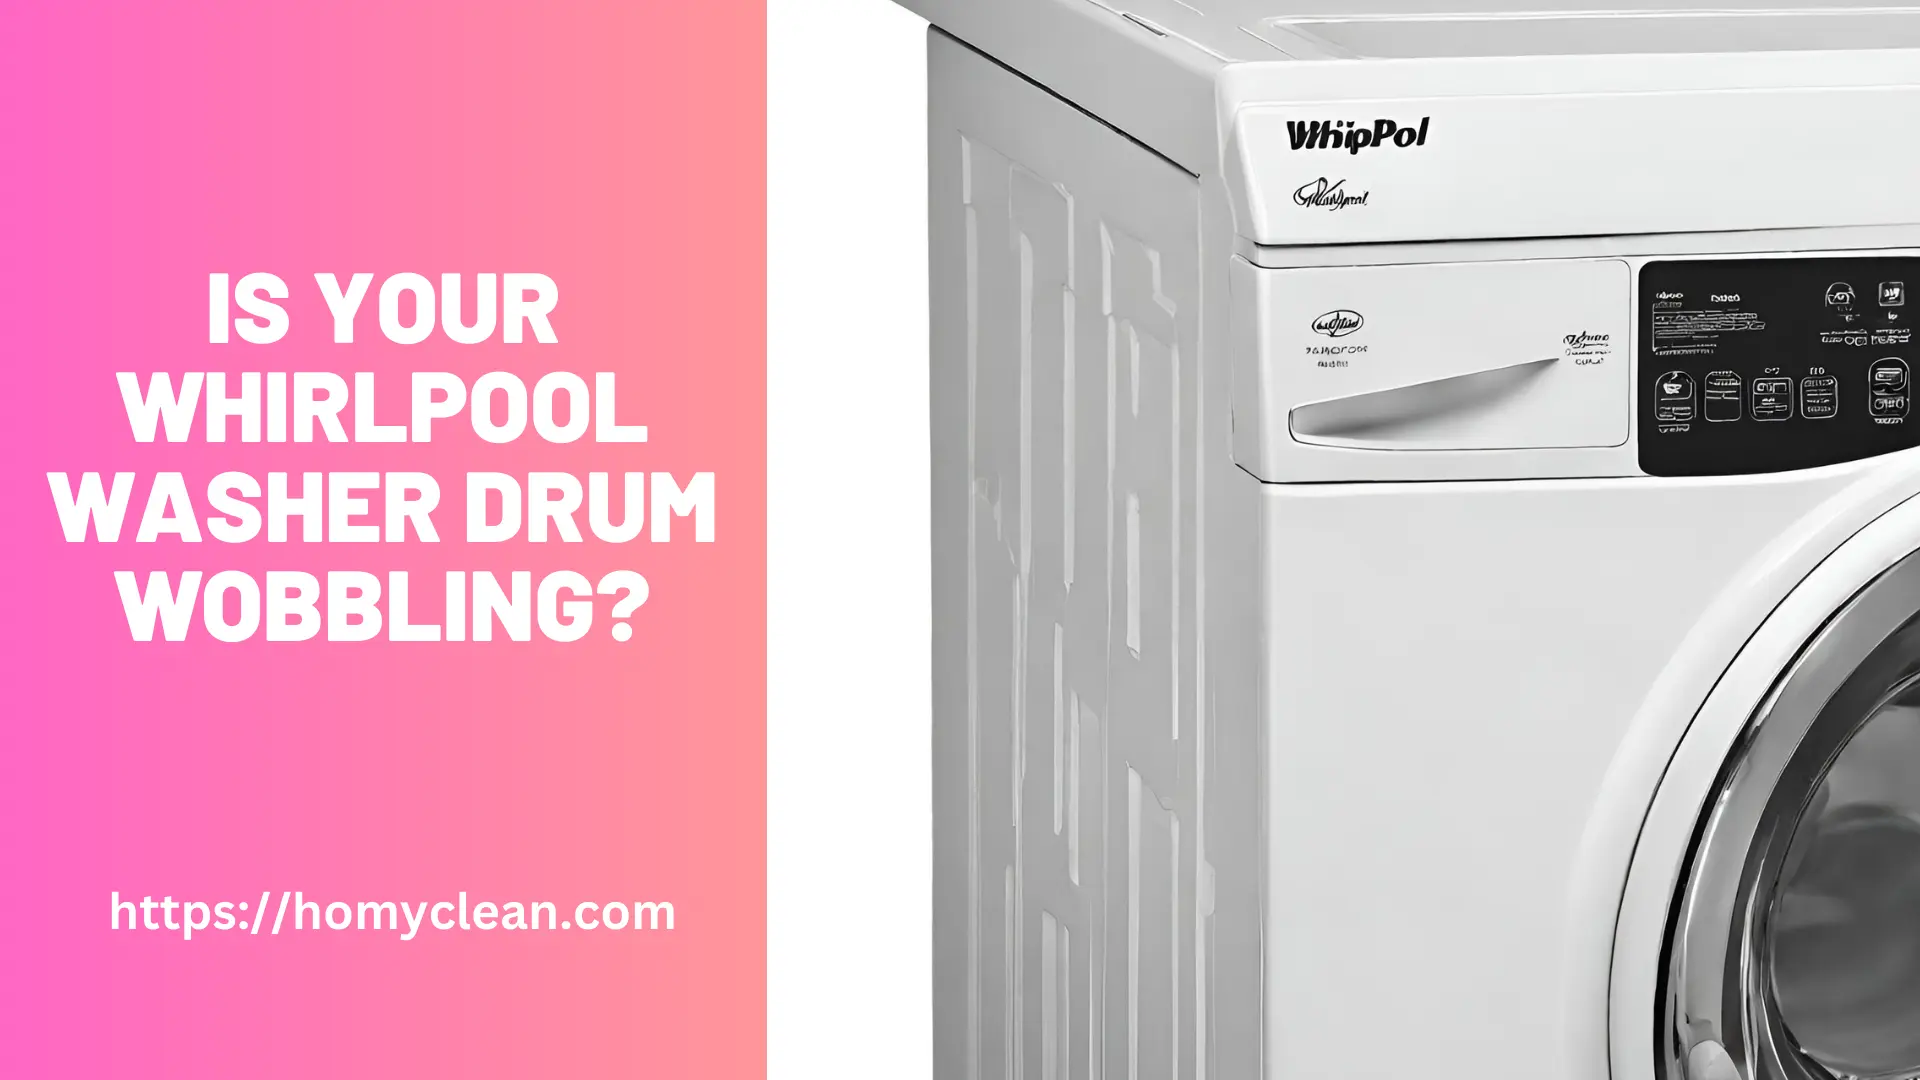 Is Your Whirlpool Washer Drum Wobbling